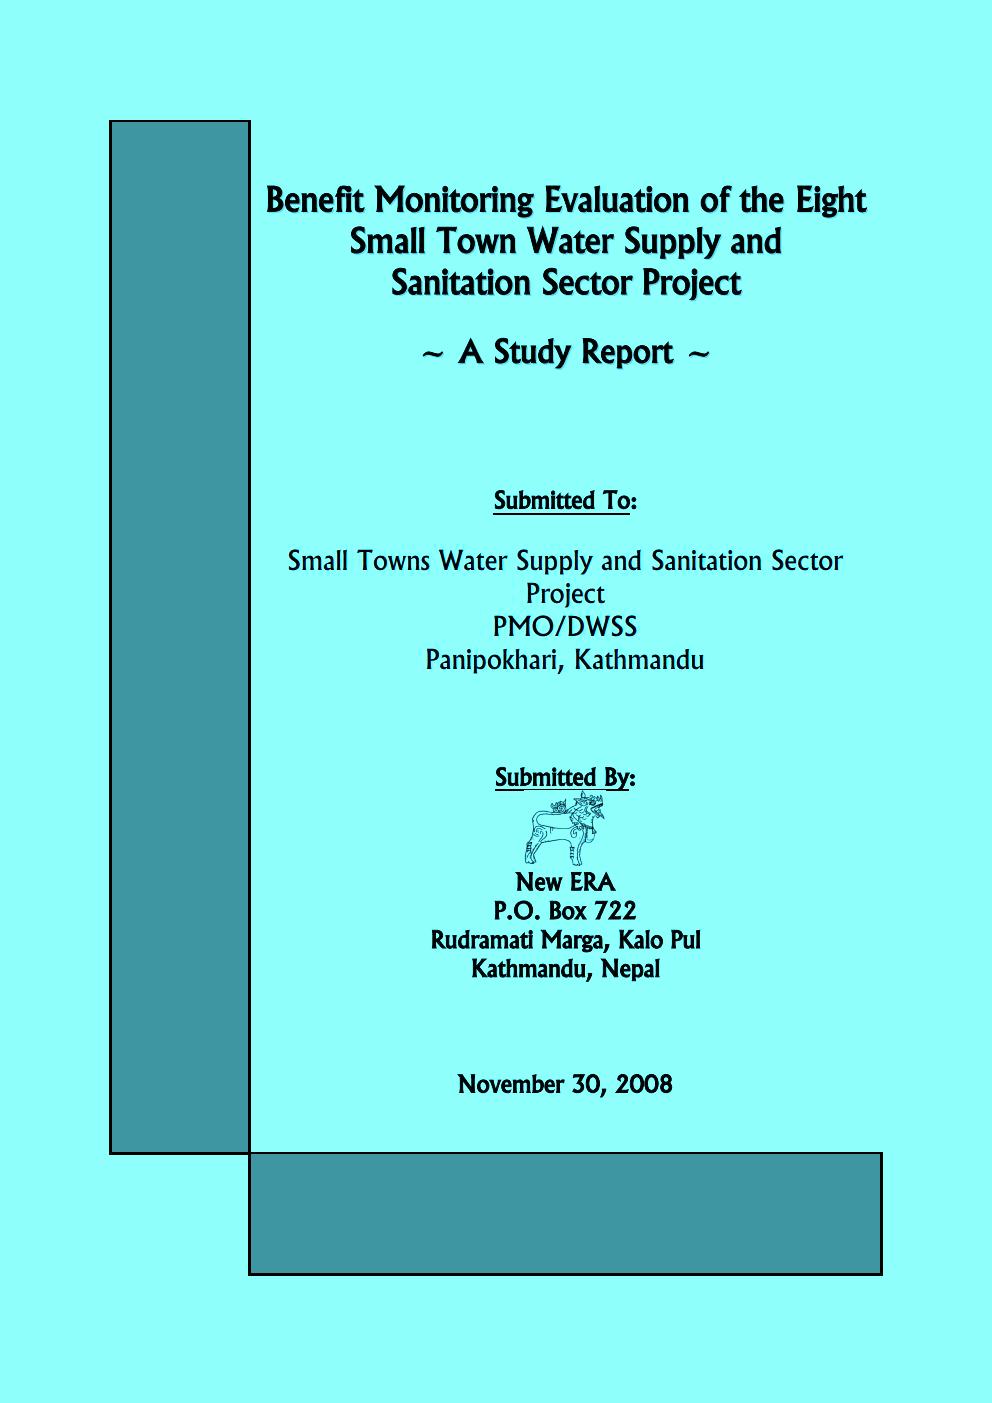 Benefit Monitoring Evaluation of the Eight Small Towns Water Supply and Sanitation Sector Project